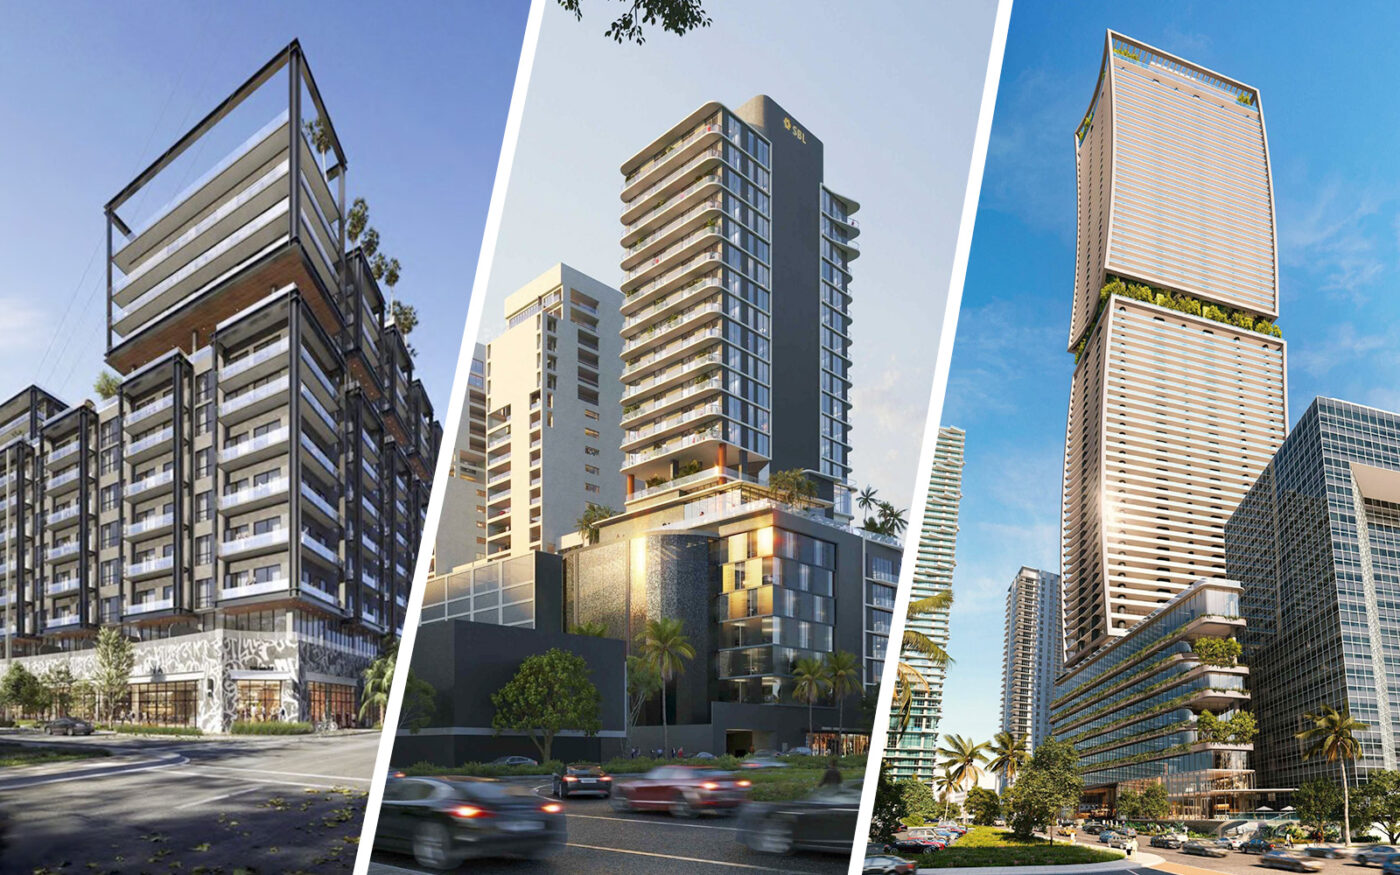 Renderings of Wynwood mixed-use project at 2110, 2118 and 2134 North Miami Avenue, Smart Luxe condo-hotel at 885 Southwest Third Avenue and Casa Tua condominiums at 1210 Brickell Avenue